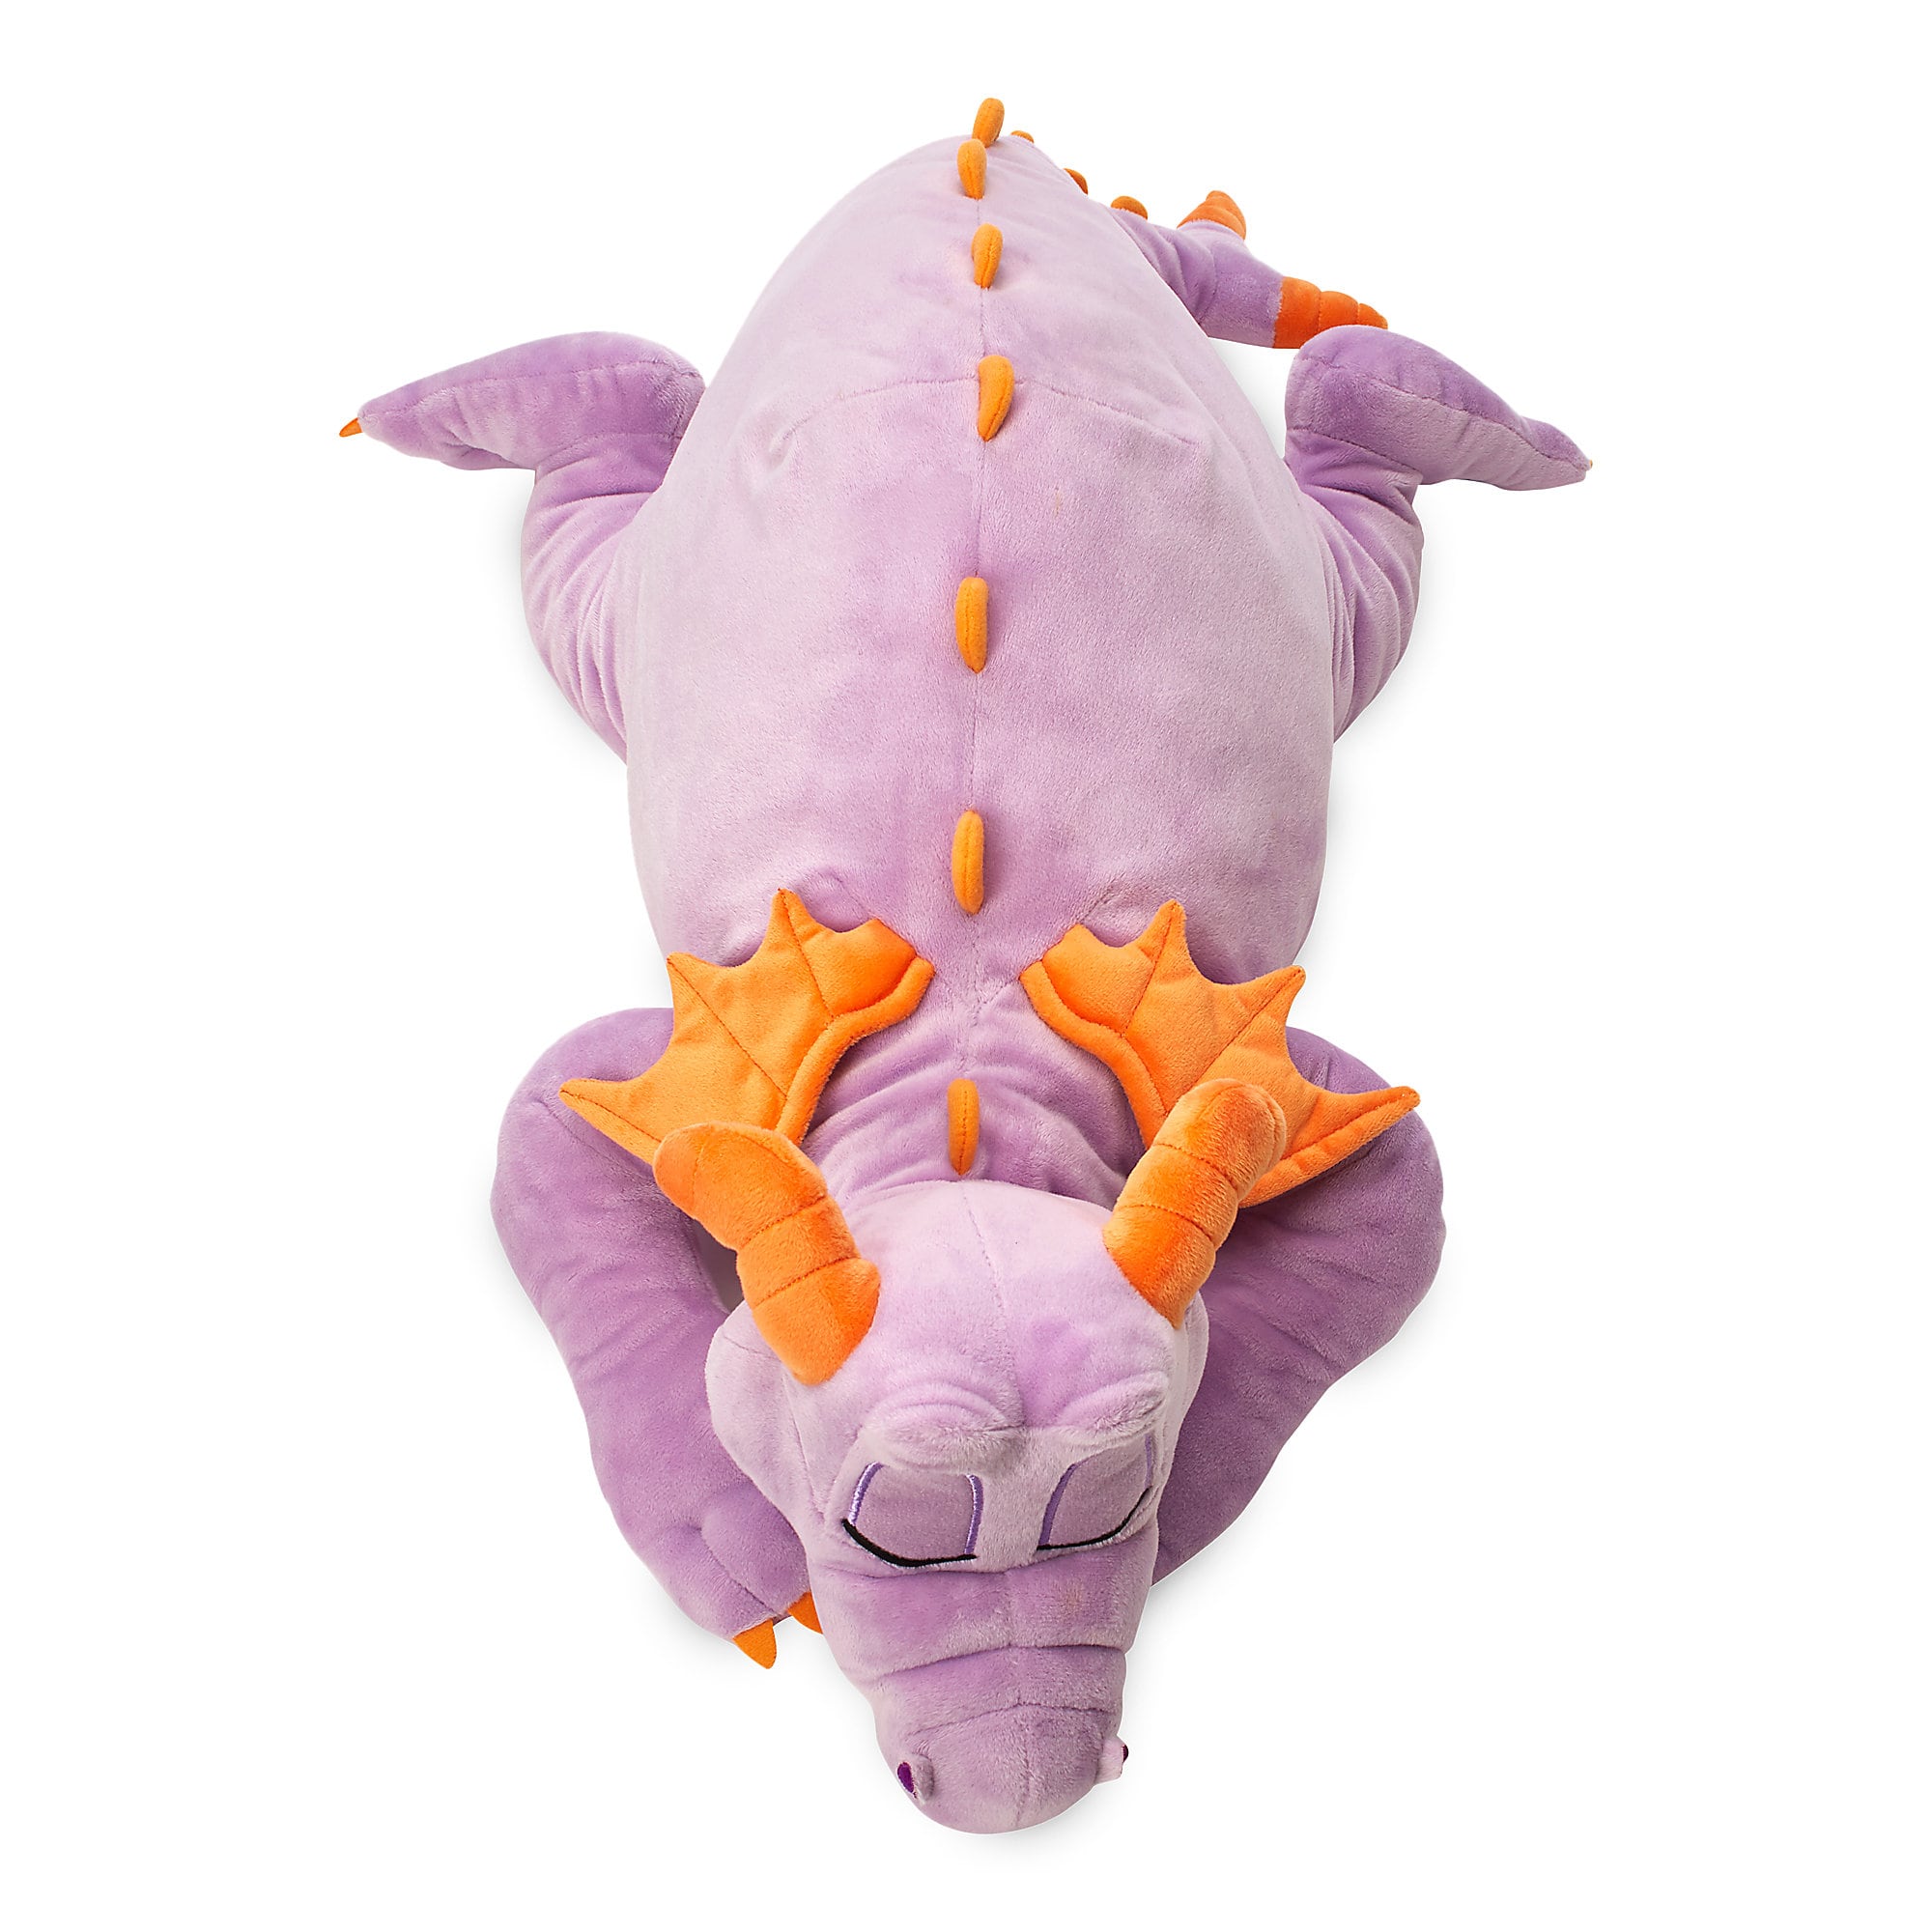 Figment Dream Friend Plush Is Cuter Than We Could Ever Imagine